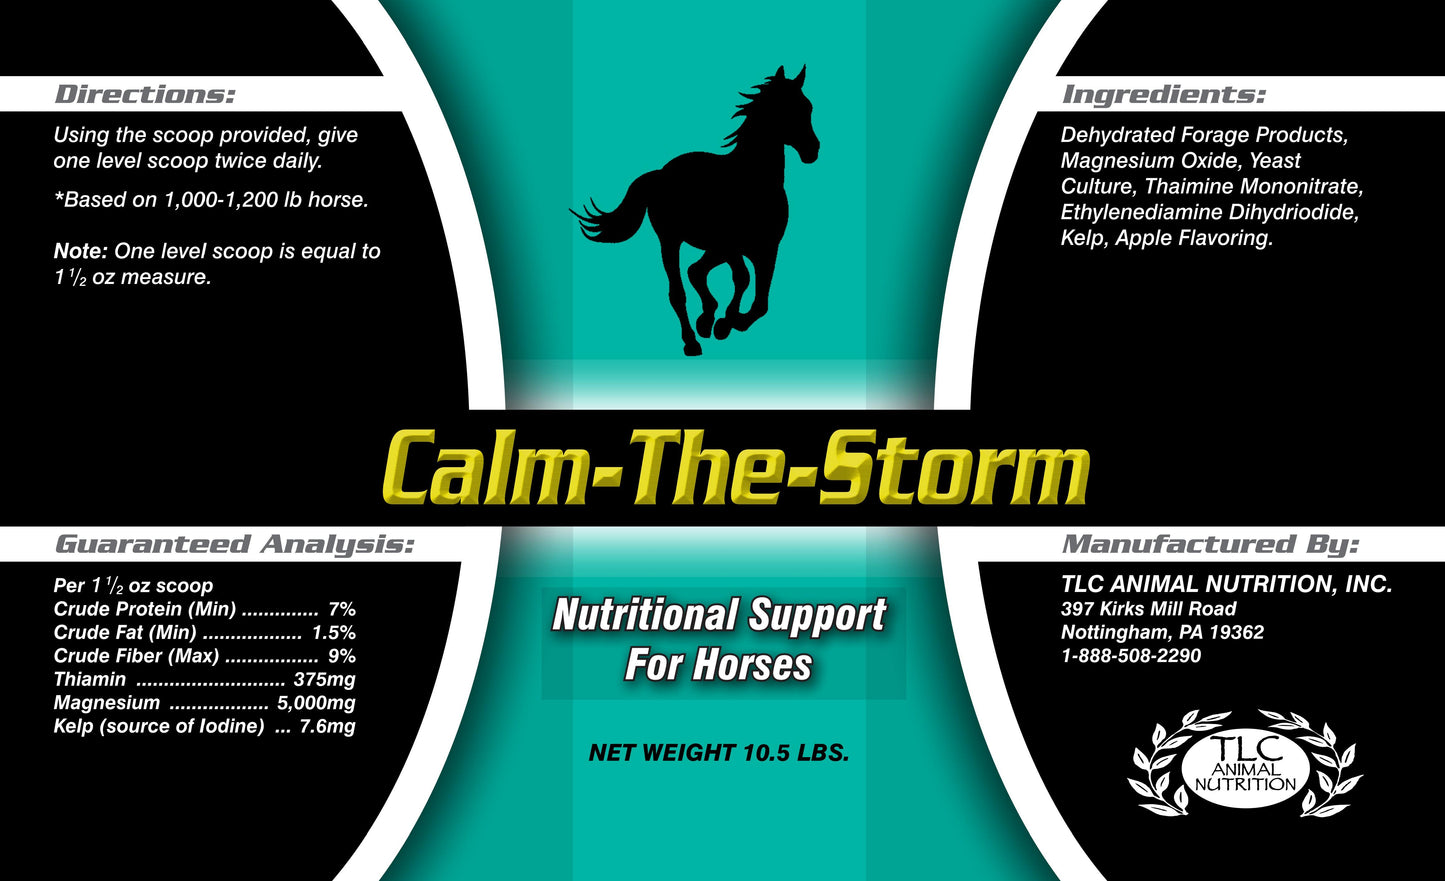 Calm-The-Storm- nutritional support for nervous horses